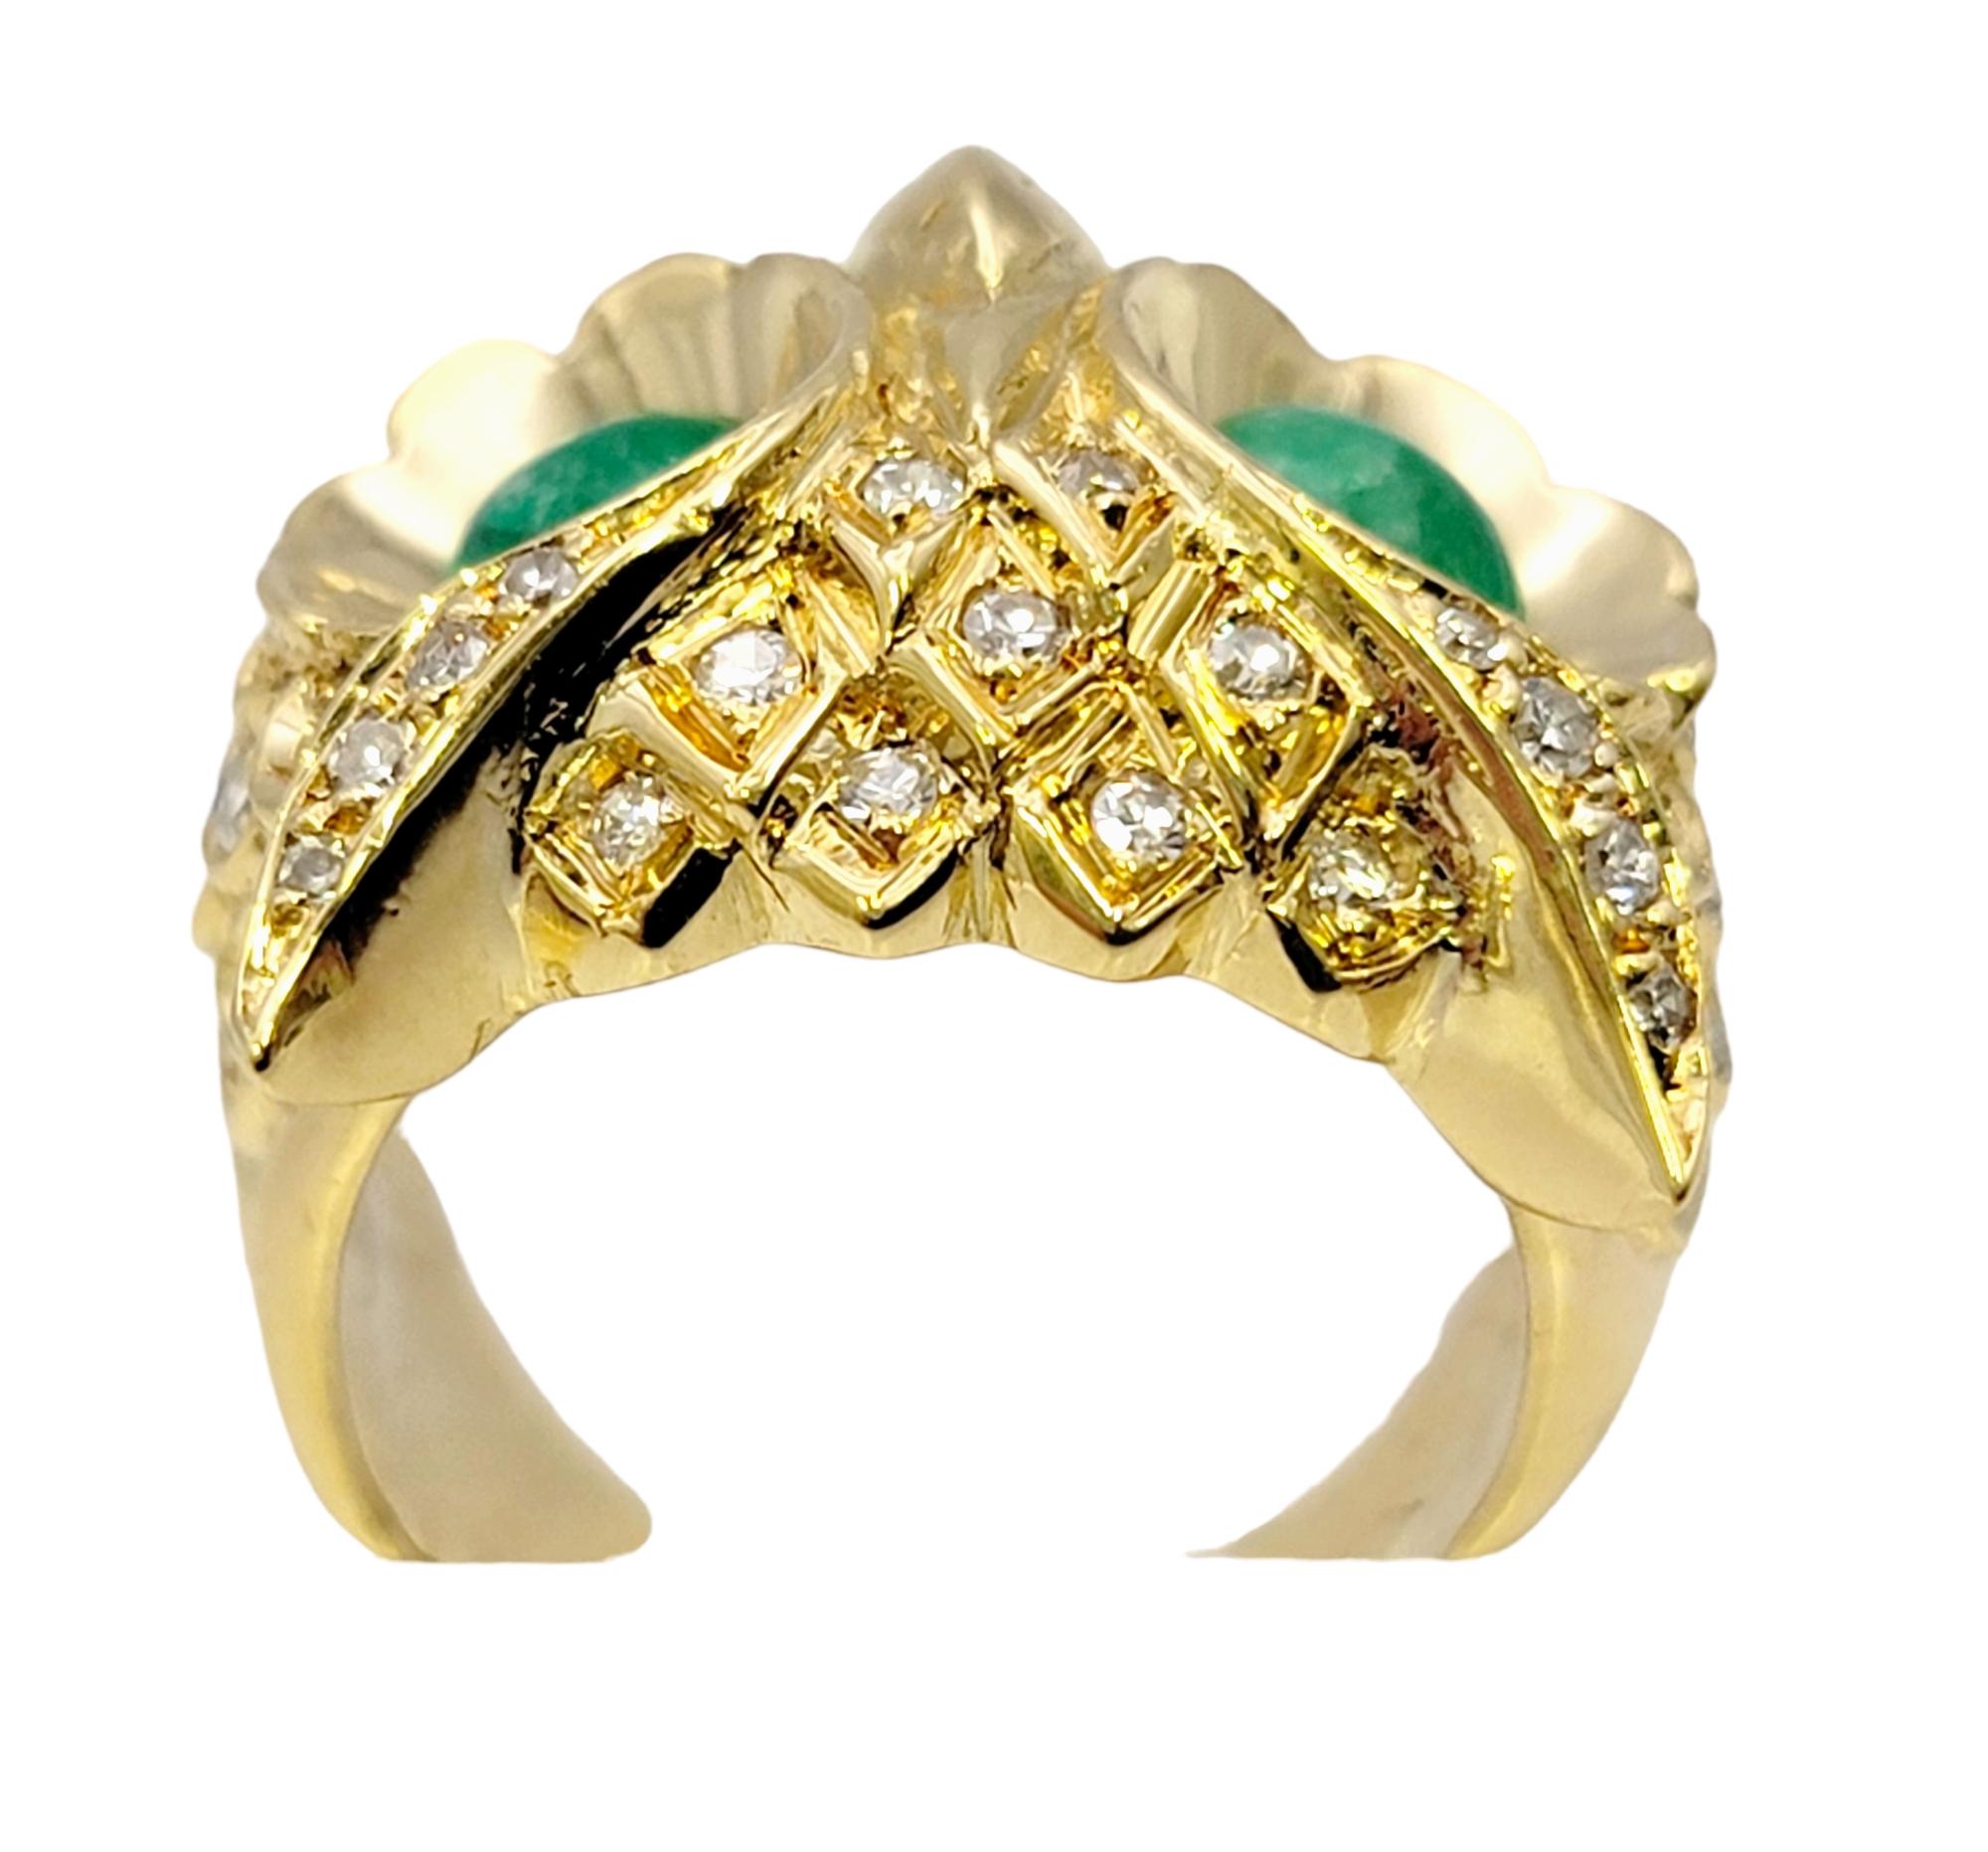 Diamond Embellished Owl Ring with Cabochon Emerald Eyes in 14 Karat Yellow Gold In Good Condition For Sale In Scottsdale, AZ